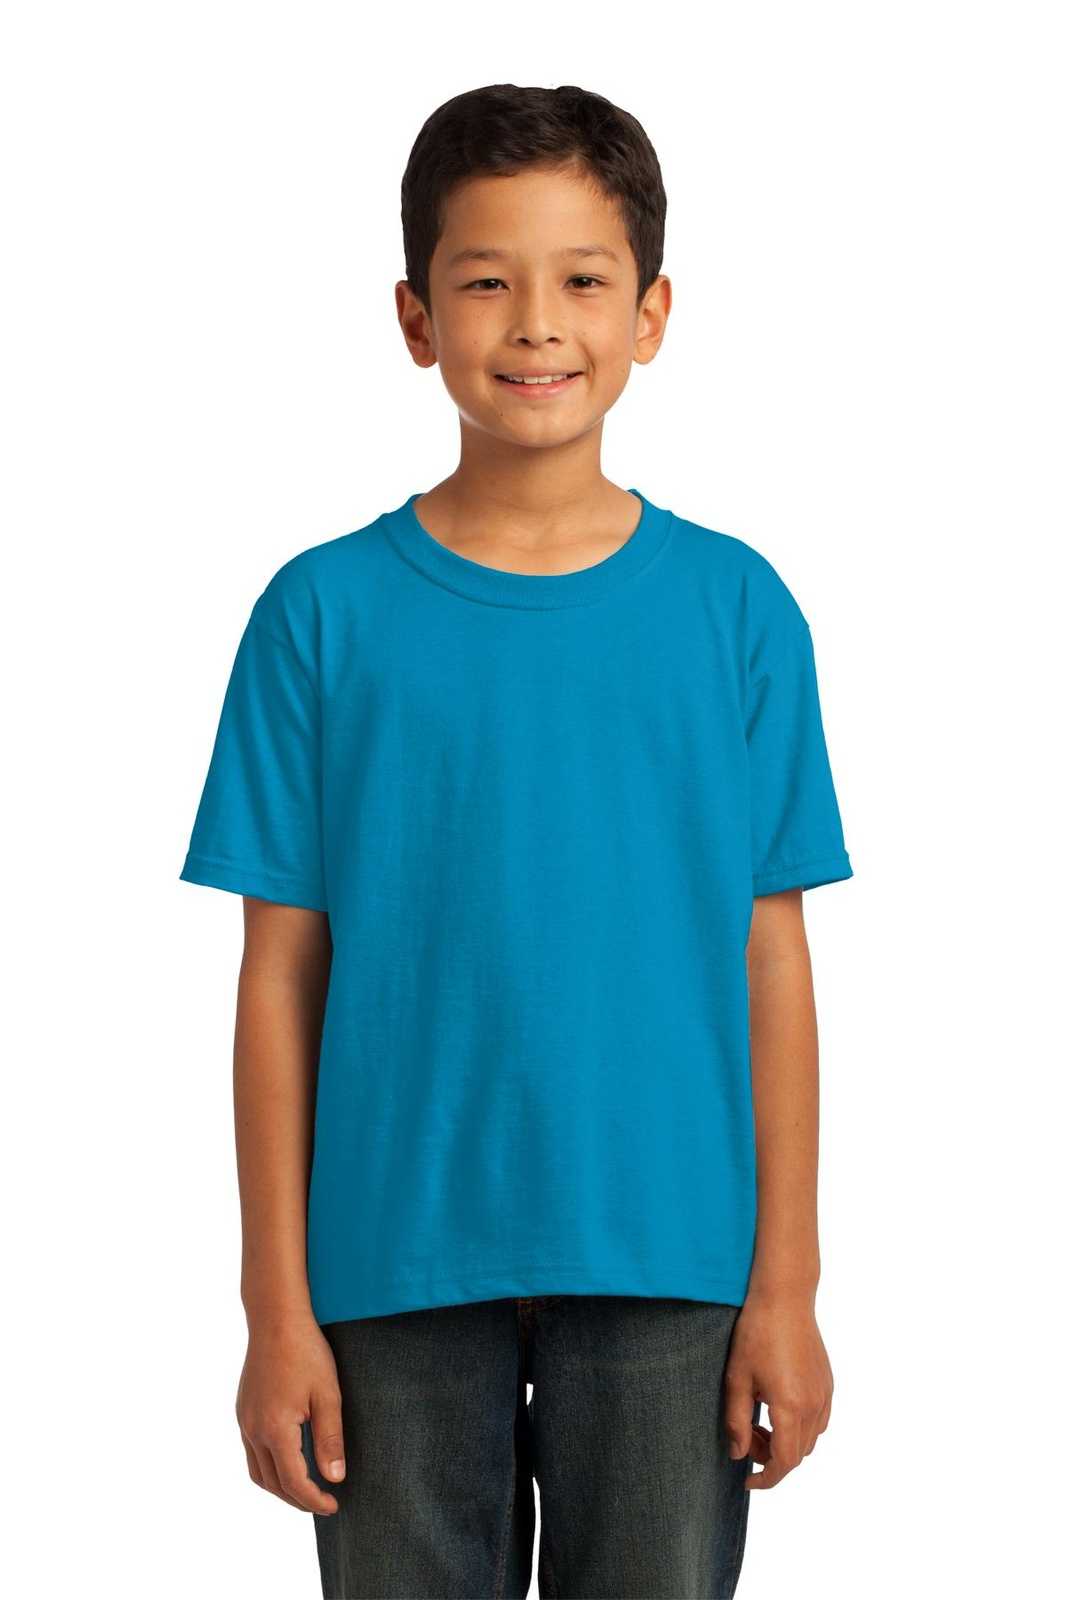 Fruit of the Loom 3930B Youth HD Cotton 100% Cotton T-Shirt - Pacific Blue - HIT a Double